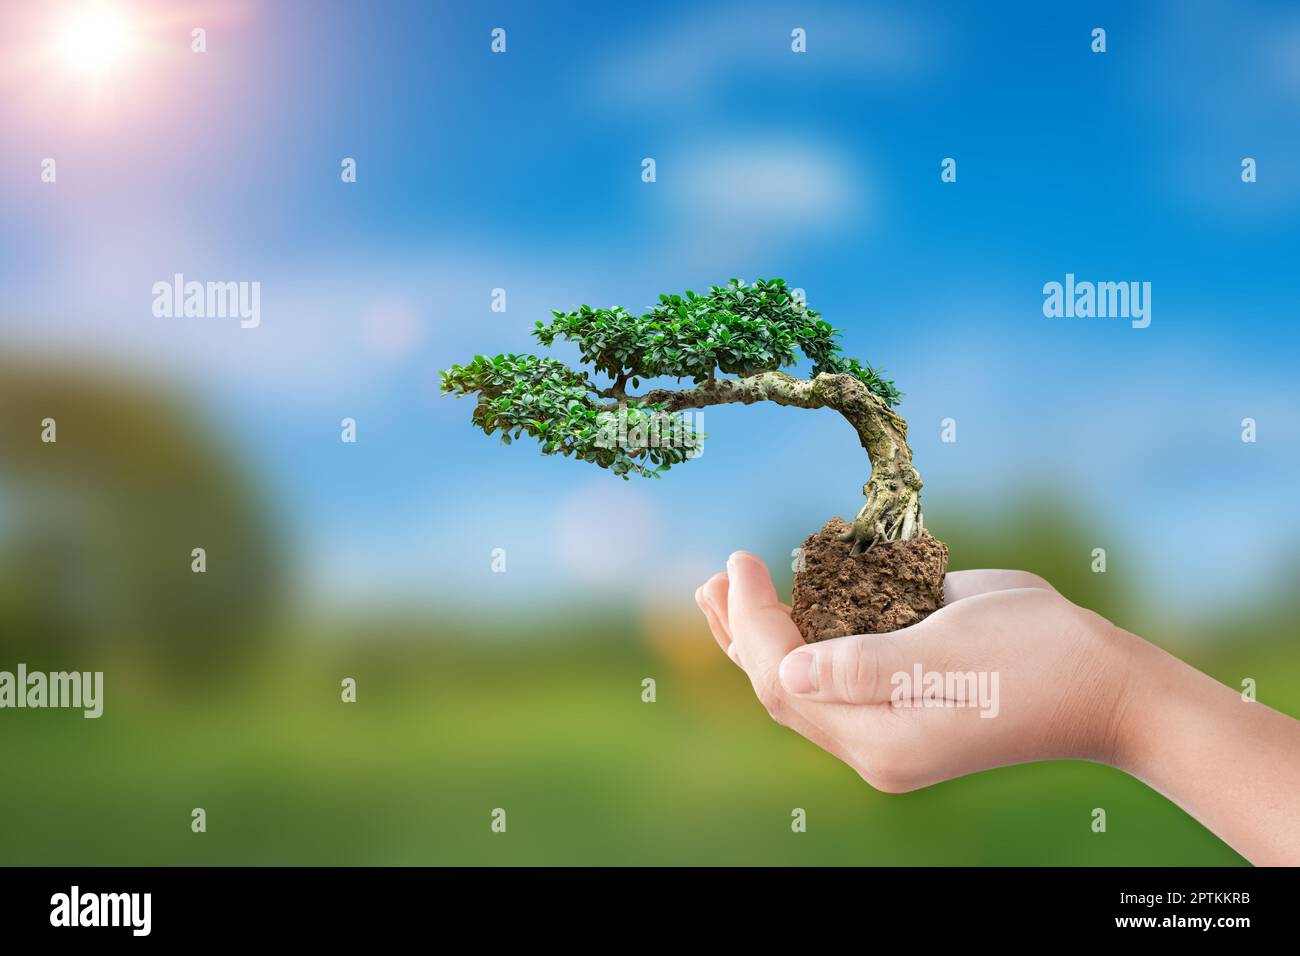 International eco earth day concept. Hand holding bonsai tree growing on natural background Stock Photo